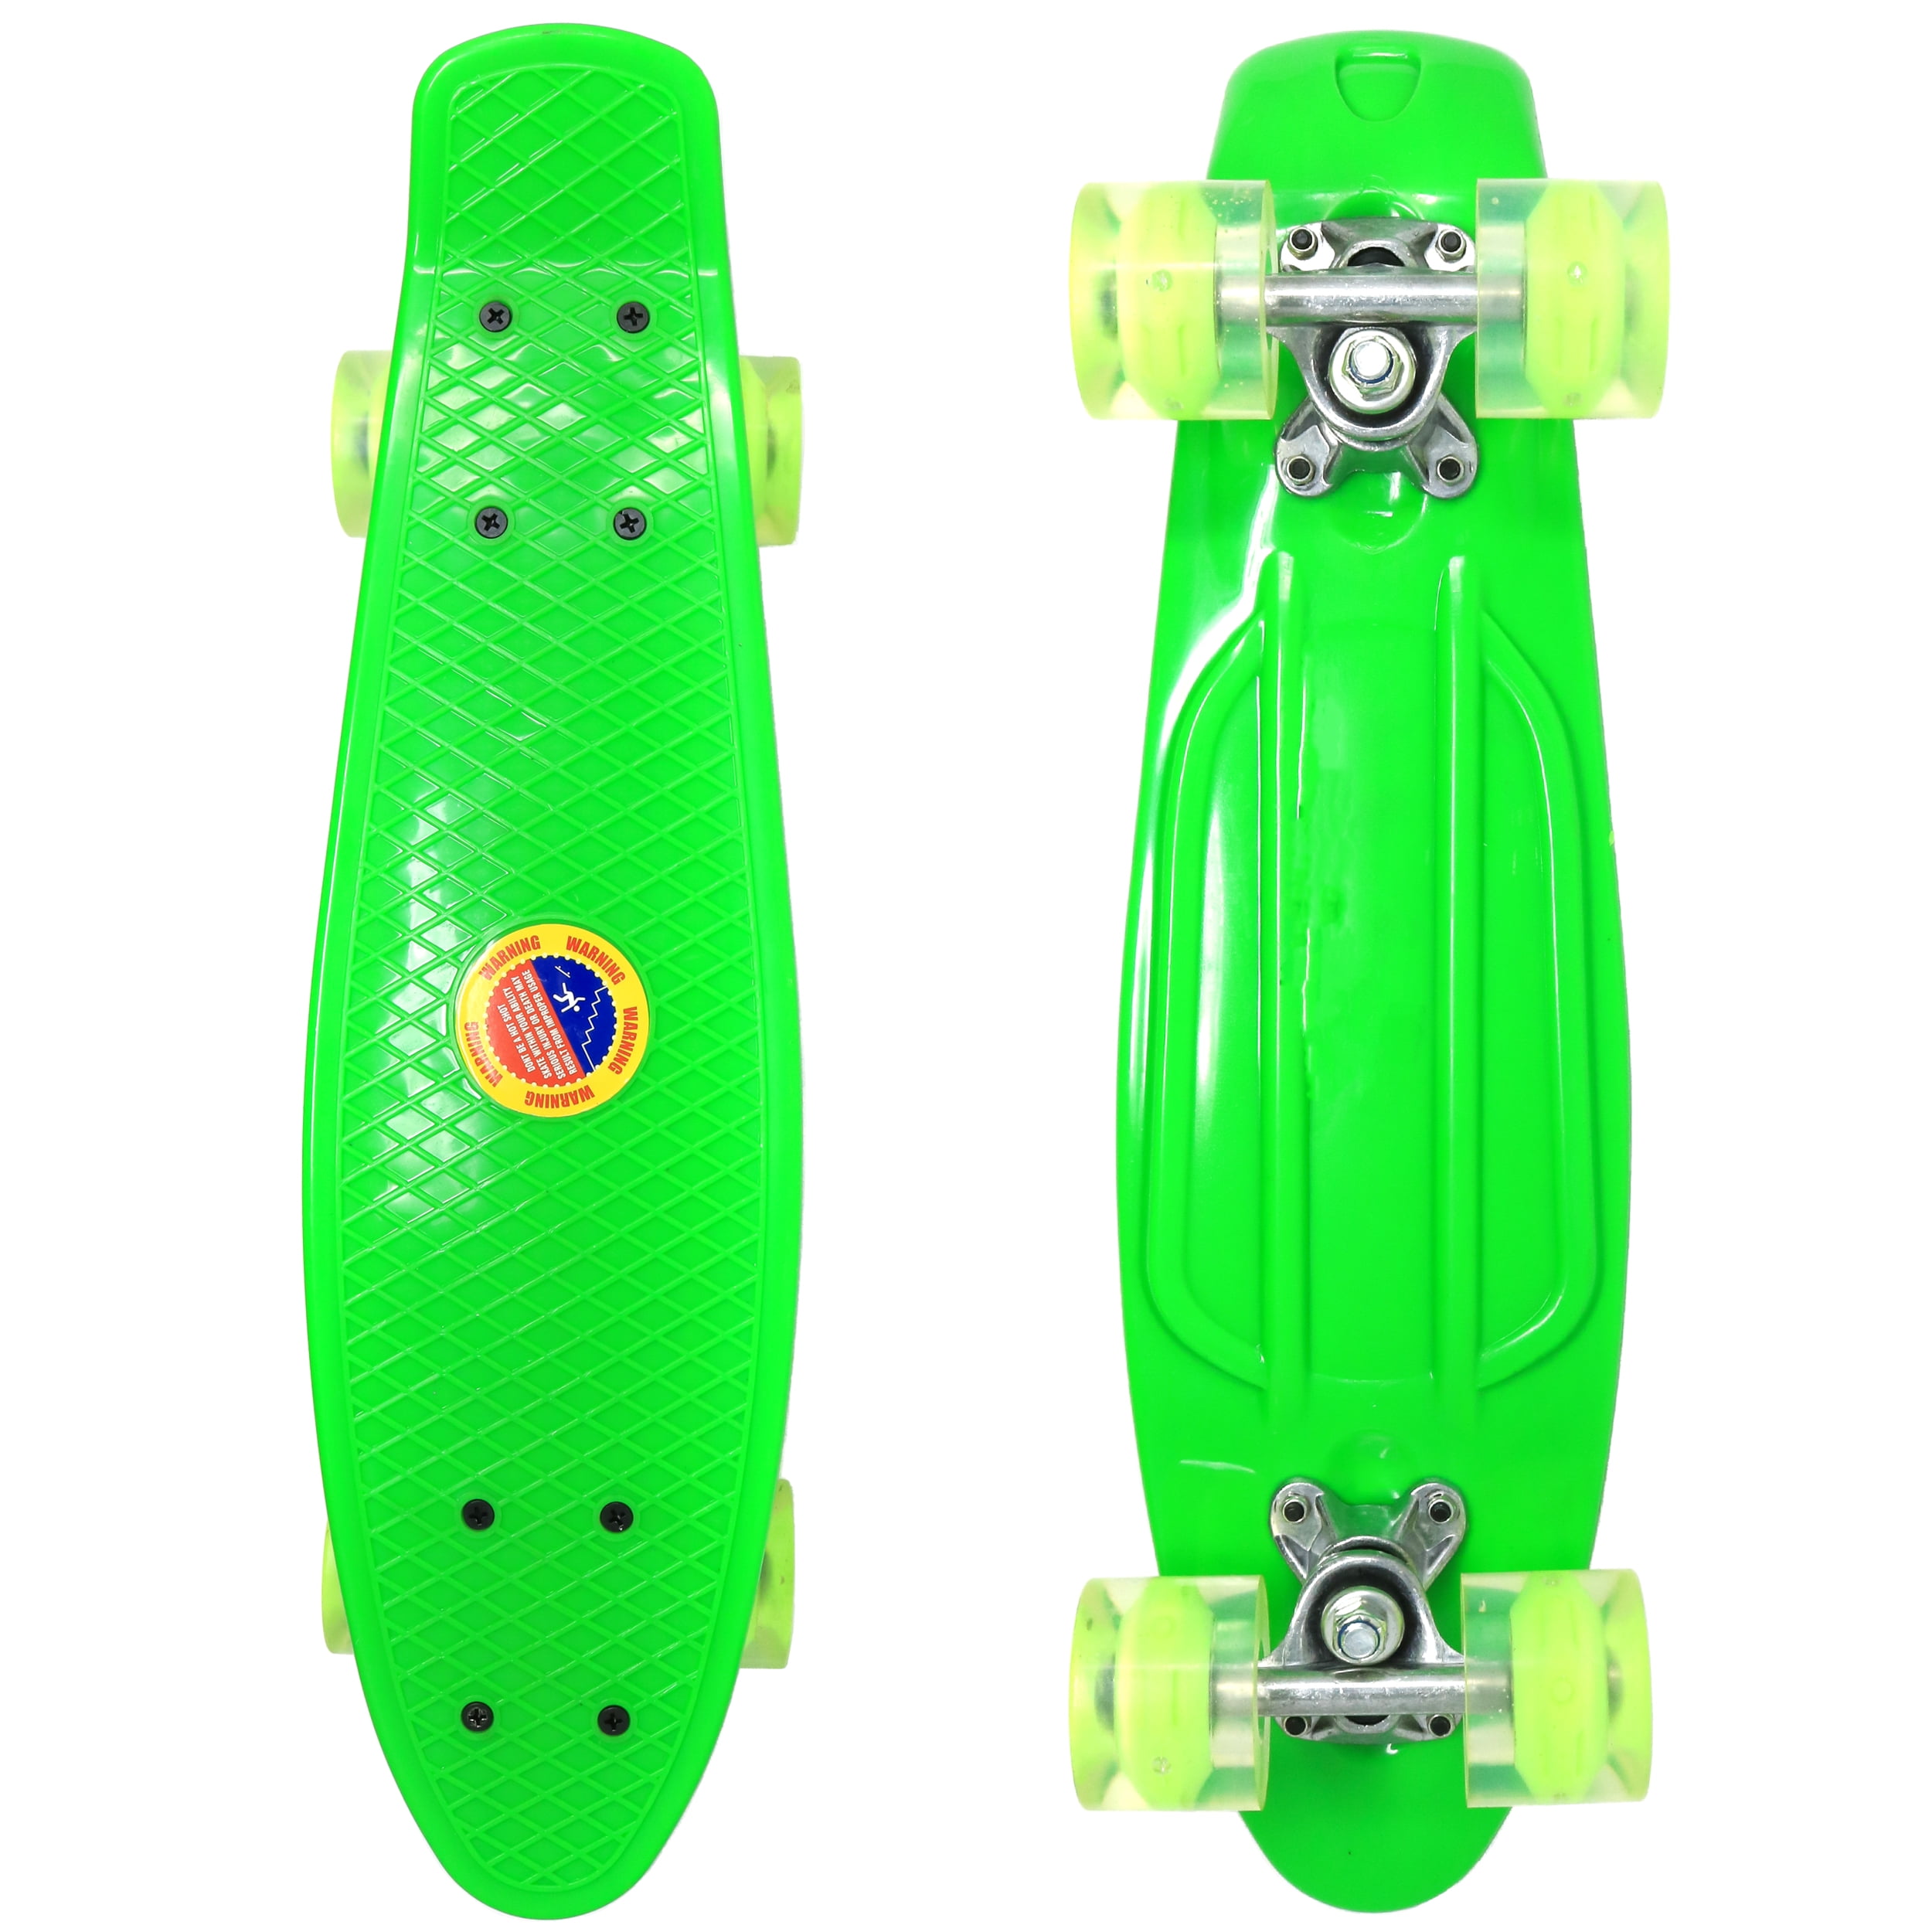 Details about   22 Board Cruiser Skateboard with LED Light Up Wheels for Beginners 3 Color E 24 